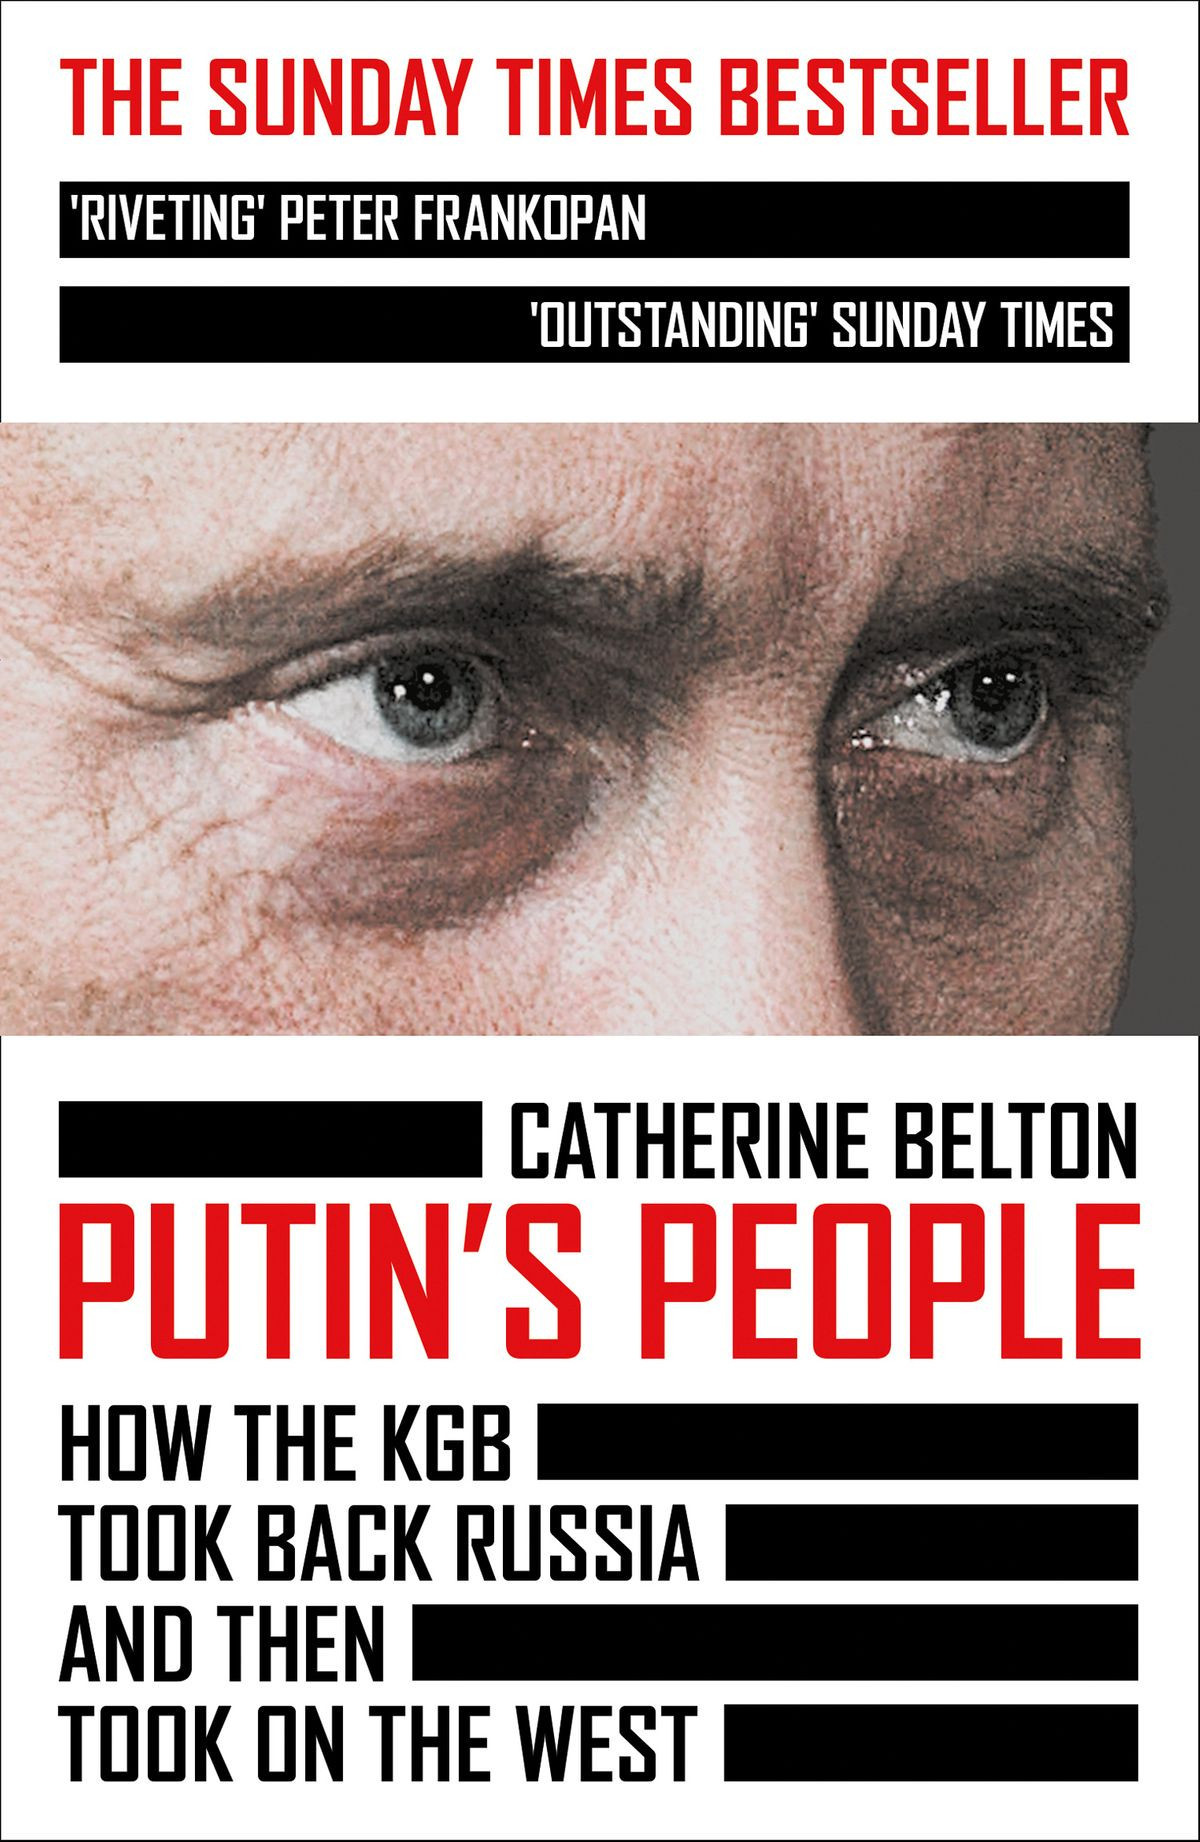 Putin’s People: How the KGB Took Back Russia and then Took on the West by Catherine Belton has been the subject of several legal actions ©HarperCollins